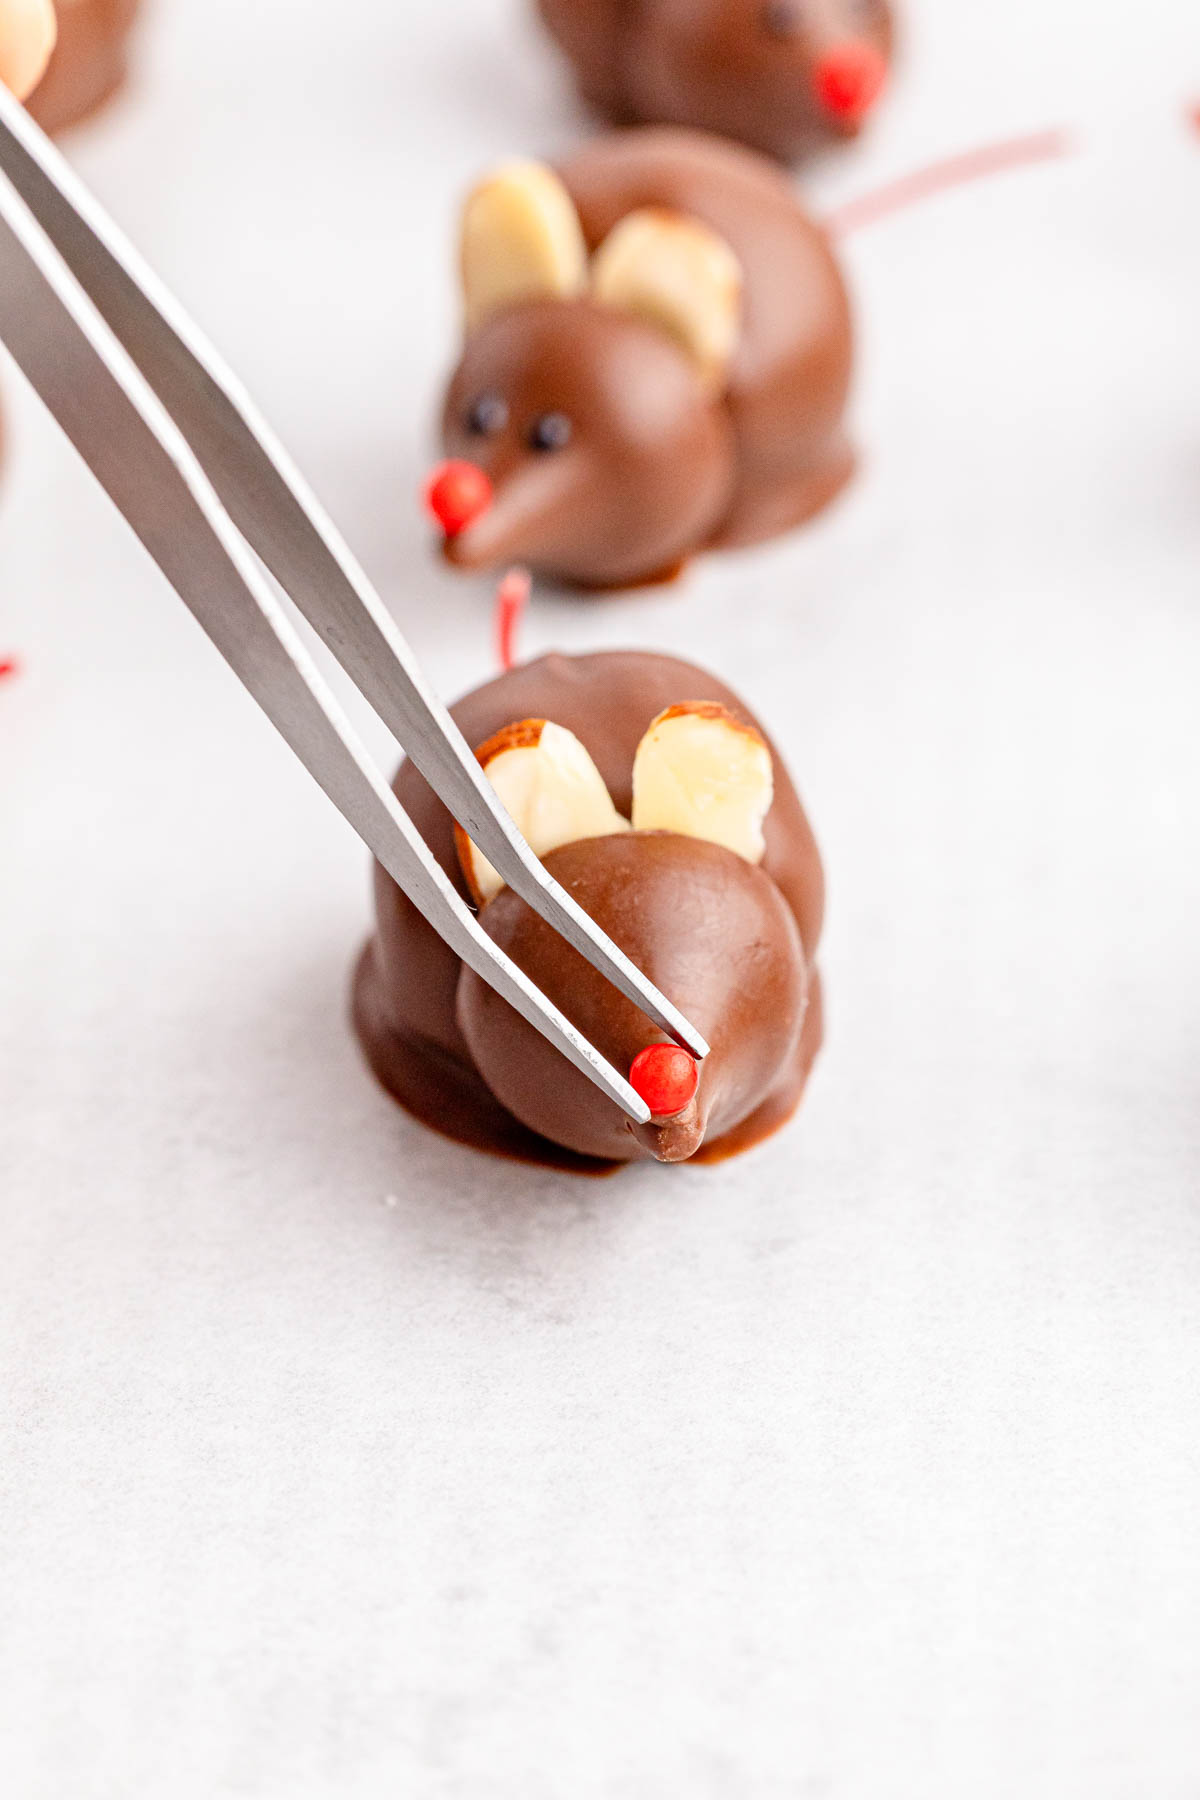 A person putting the nose on a chocolate mouse with tweezers